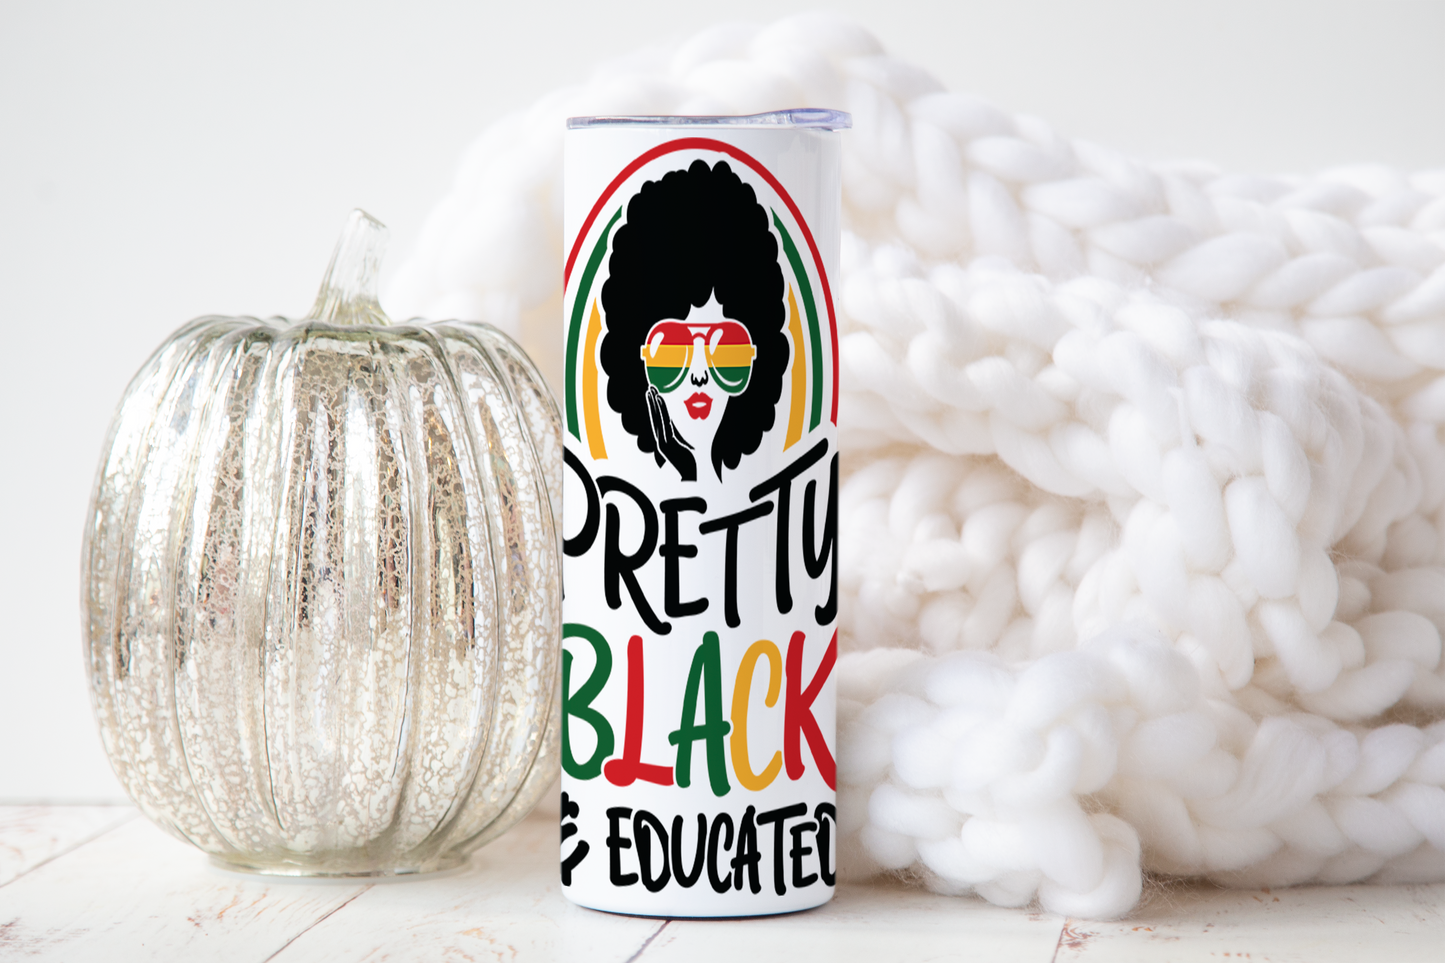 Pretty, Black and Educated Tumbler